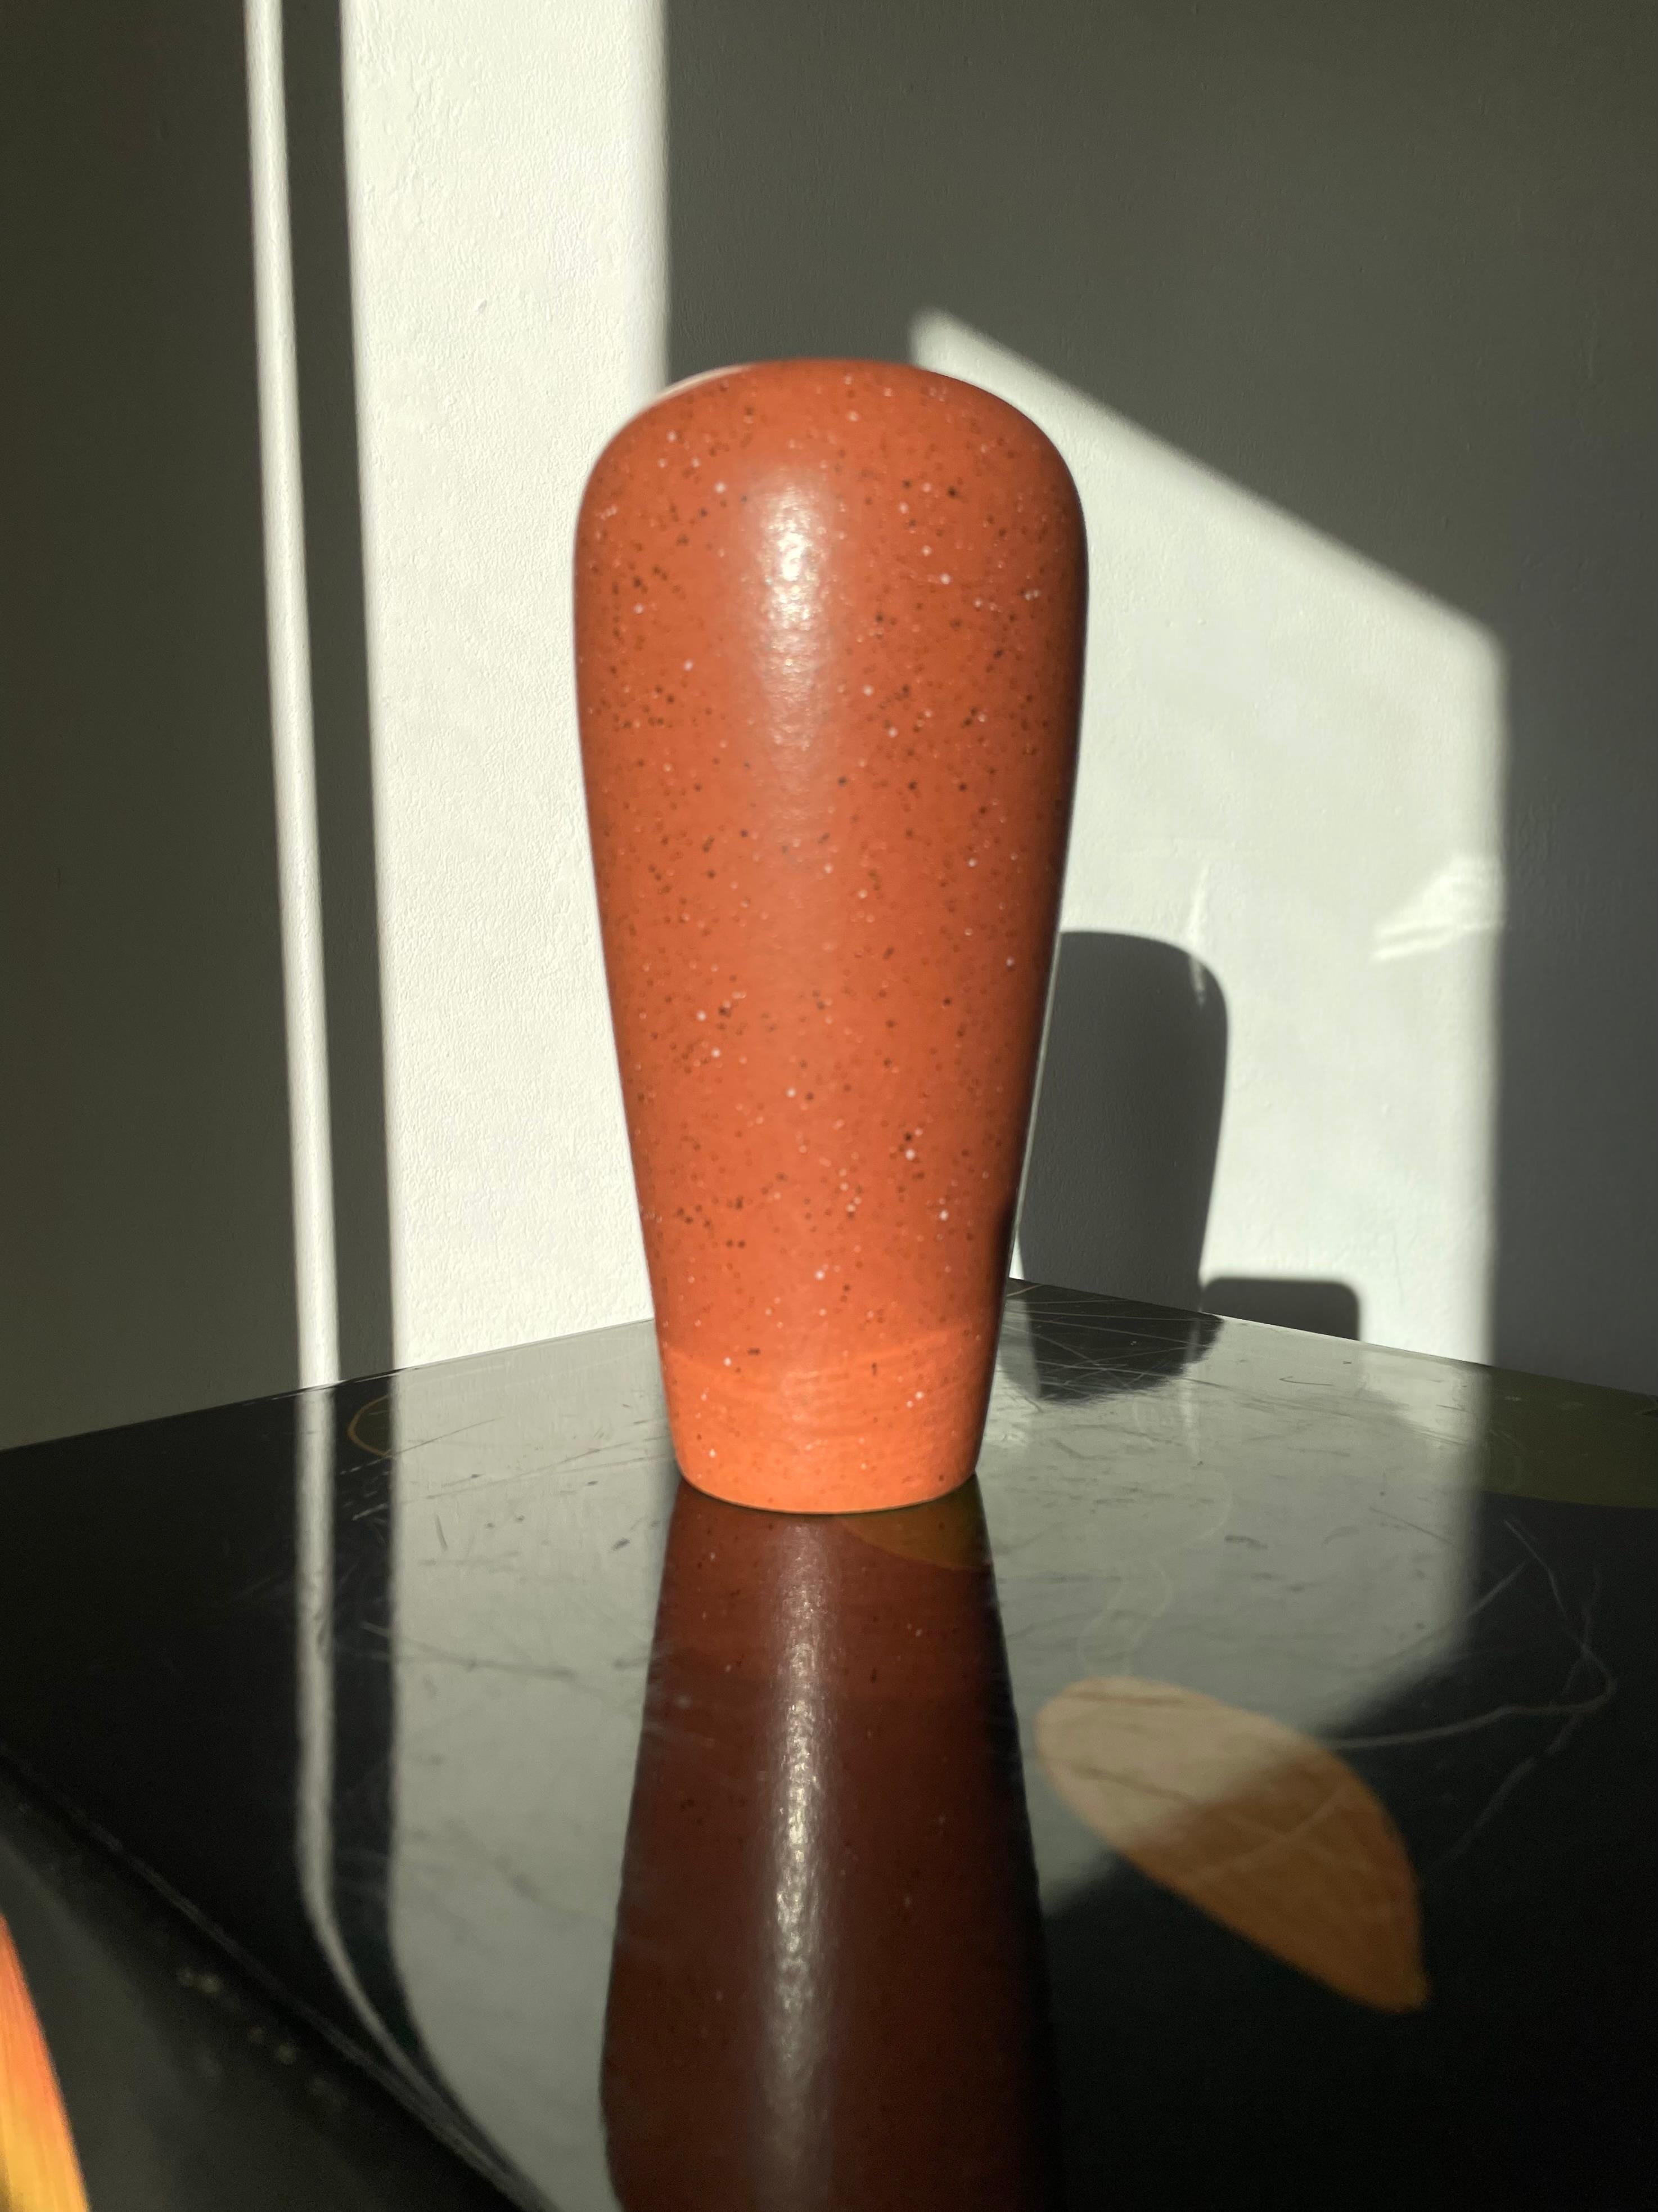 Elegantly shaped German midcentury modern handmade ceramic vase with speckled rusty red matte glaze. Manufactured by Scheurich Keramik in the 1970s. Stamped under base. Beautiful vintage condition. 
Germany, 1970s. 